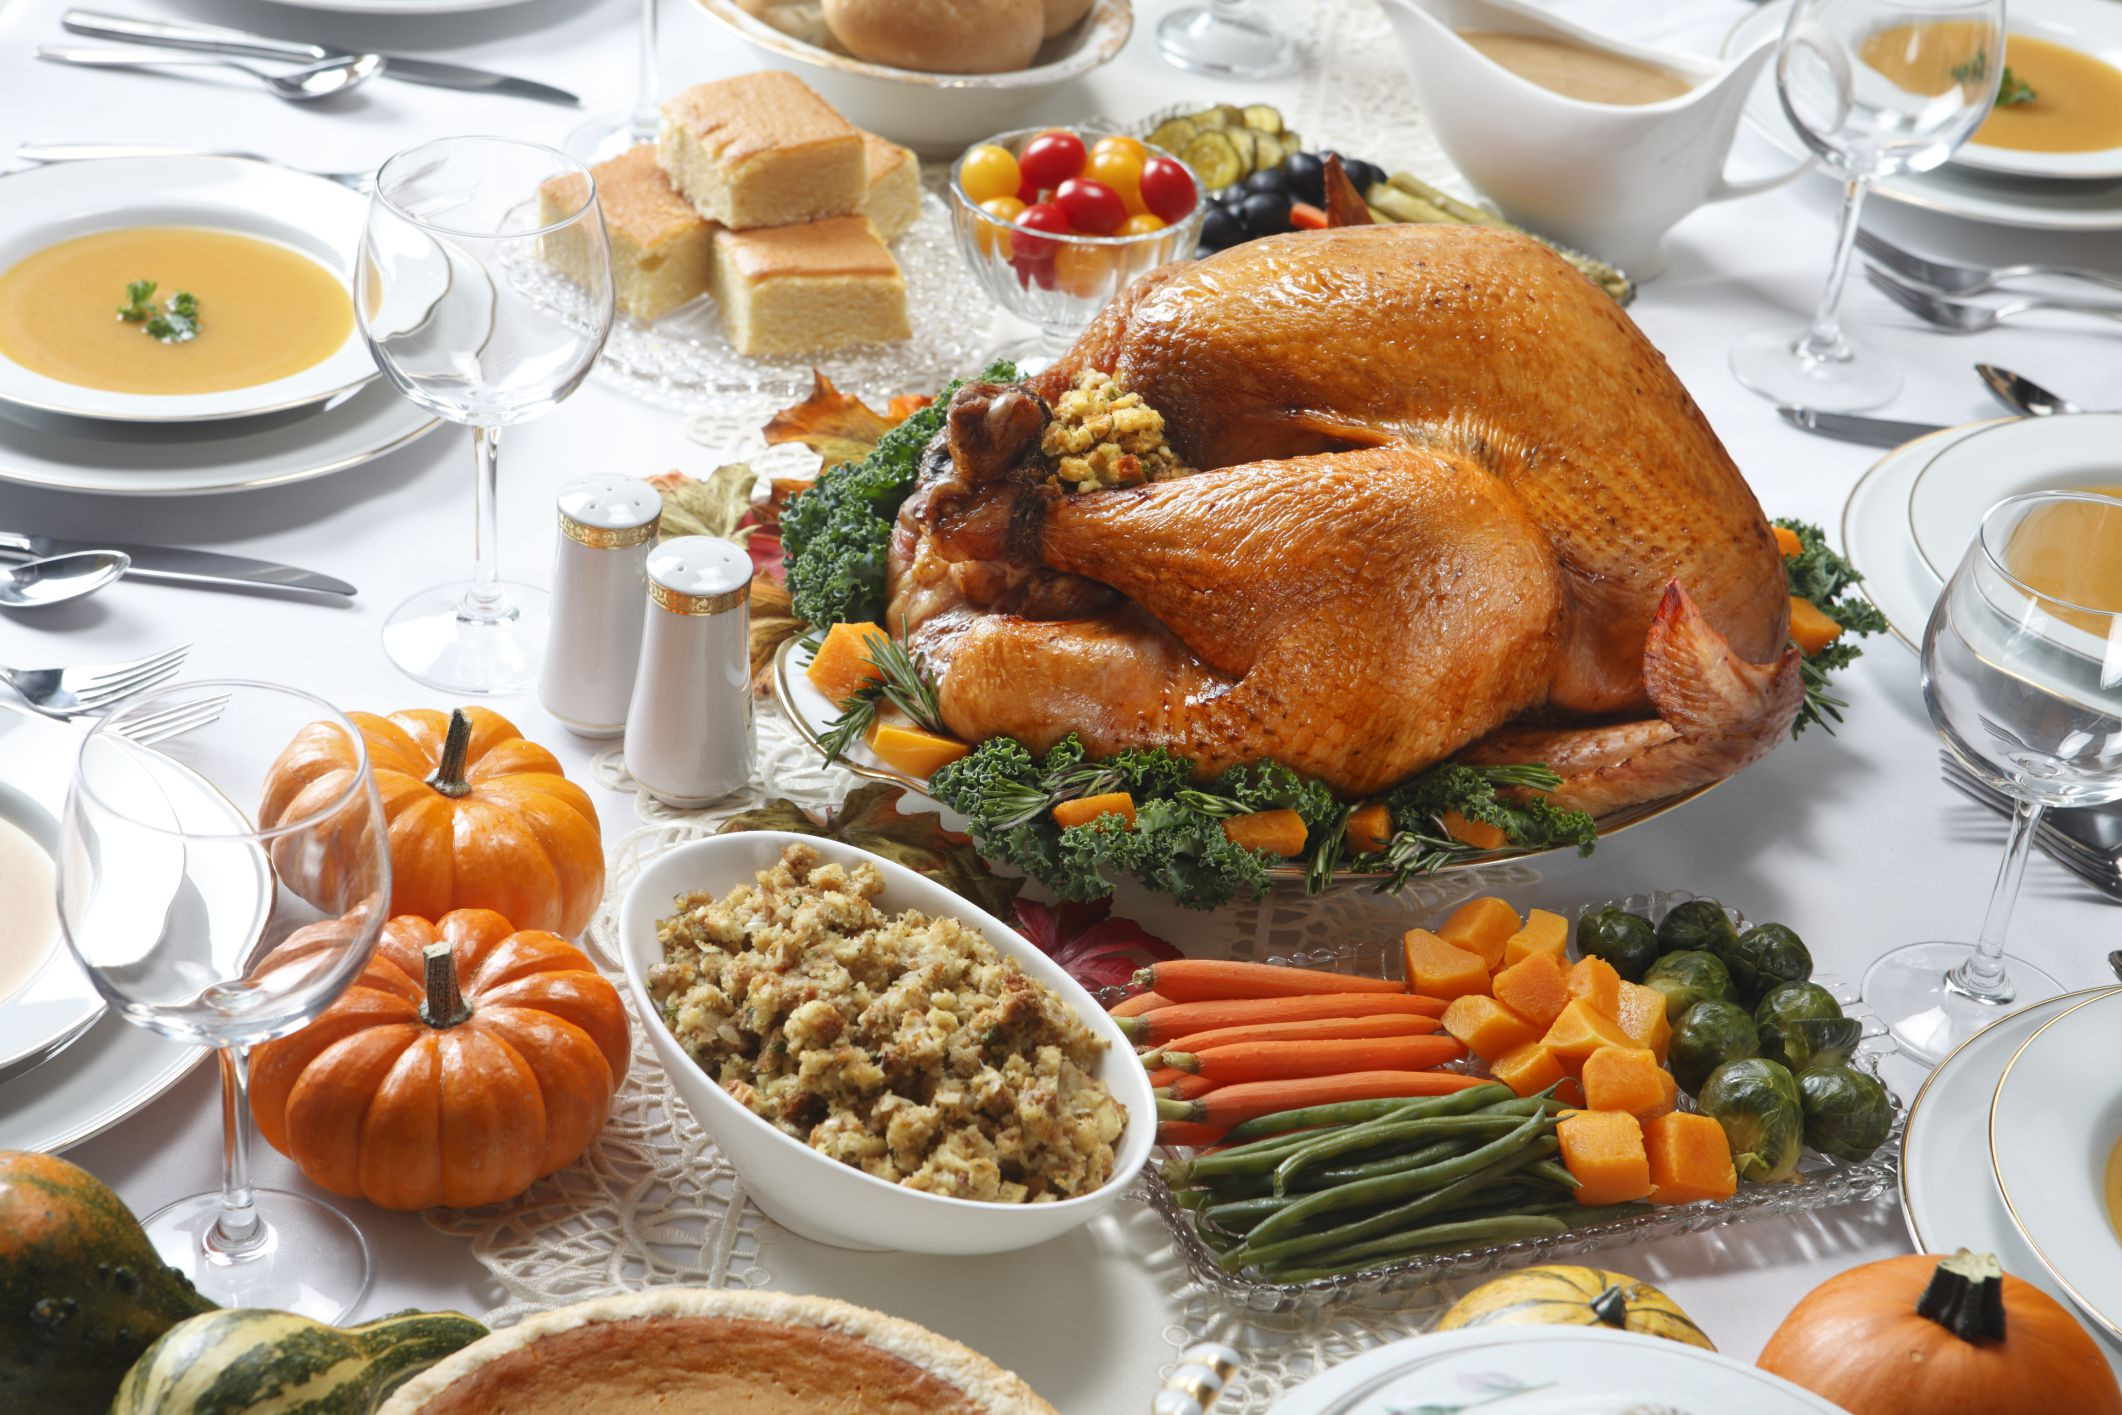 Typical Thanksgiving Dinner
 How to Make a Traditional Thanksgiving Meal Gluten Free